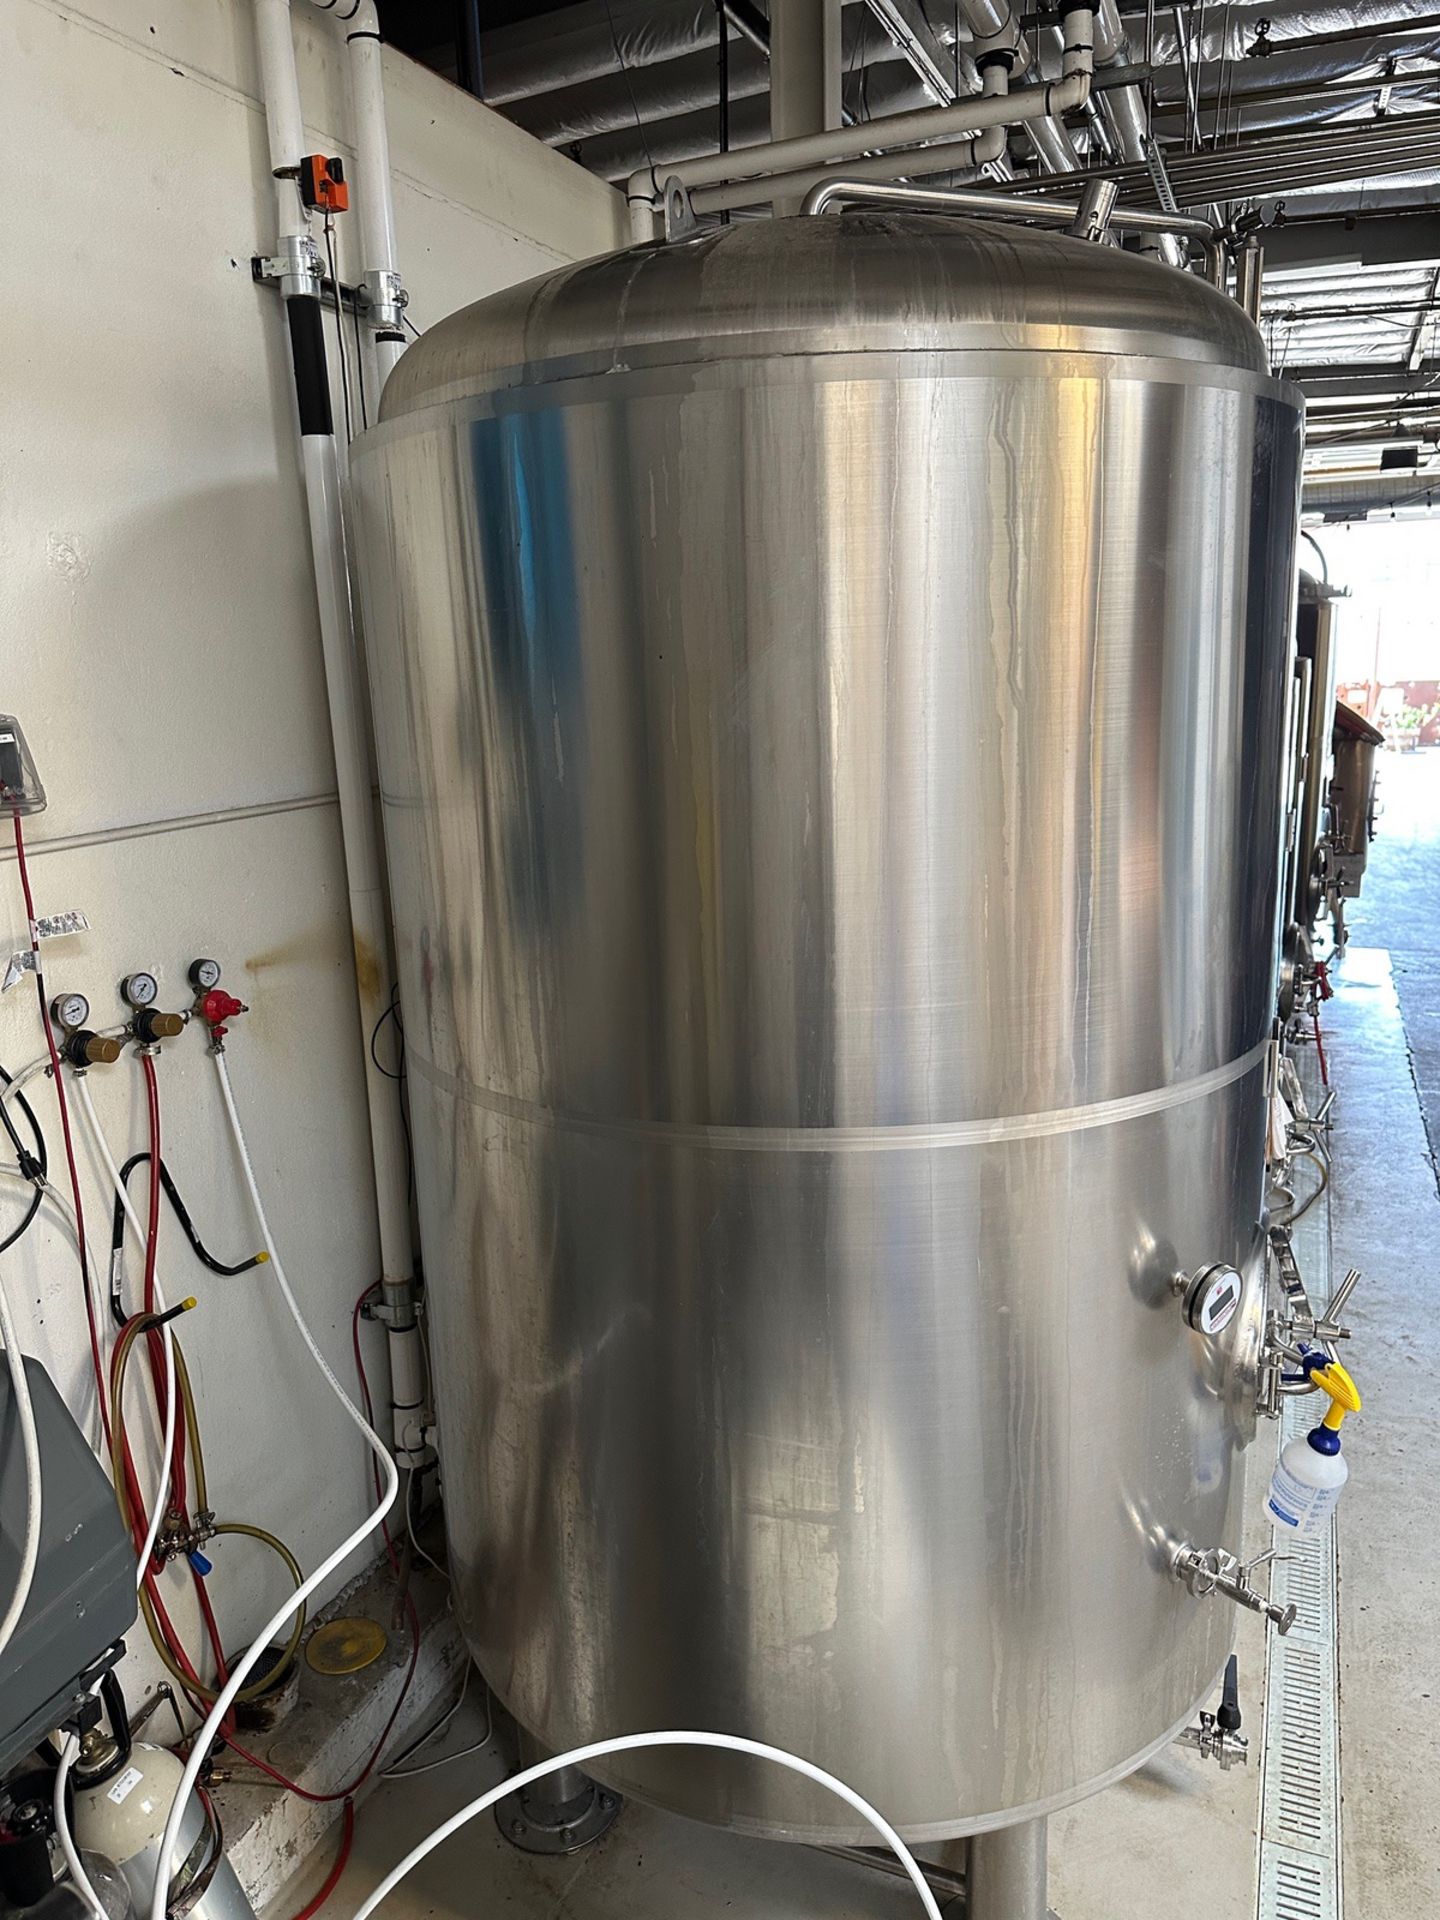 Prospero Brew Pro 30 BBL Stainless Steel Brite Tank - Dish Bottom, Glycol Jacketed, | Rig Fee $1250 - Image 2 of 3